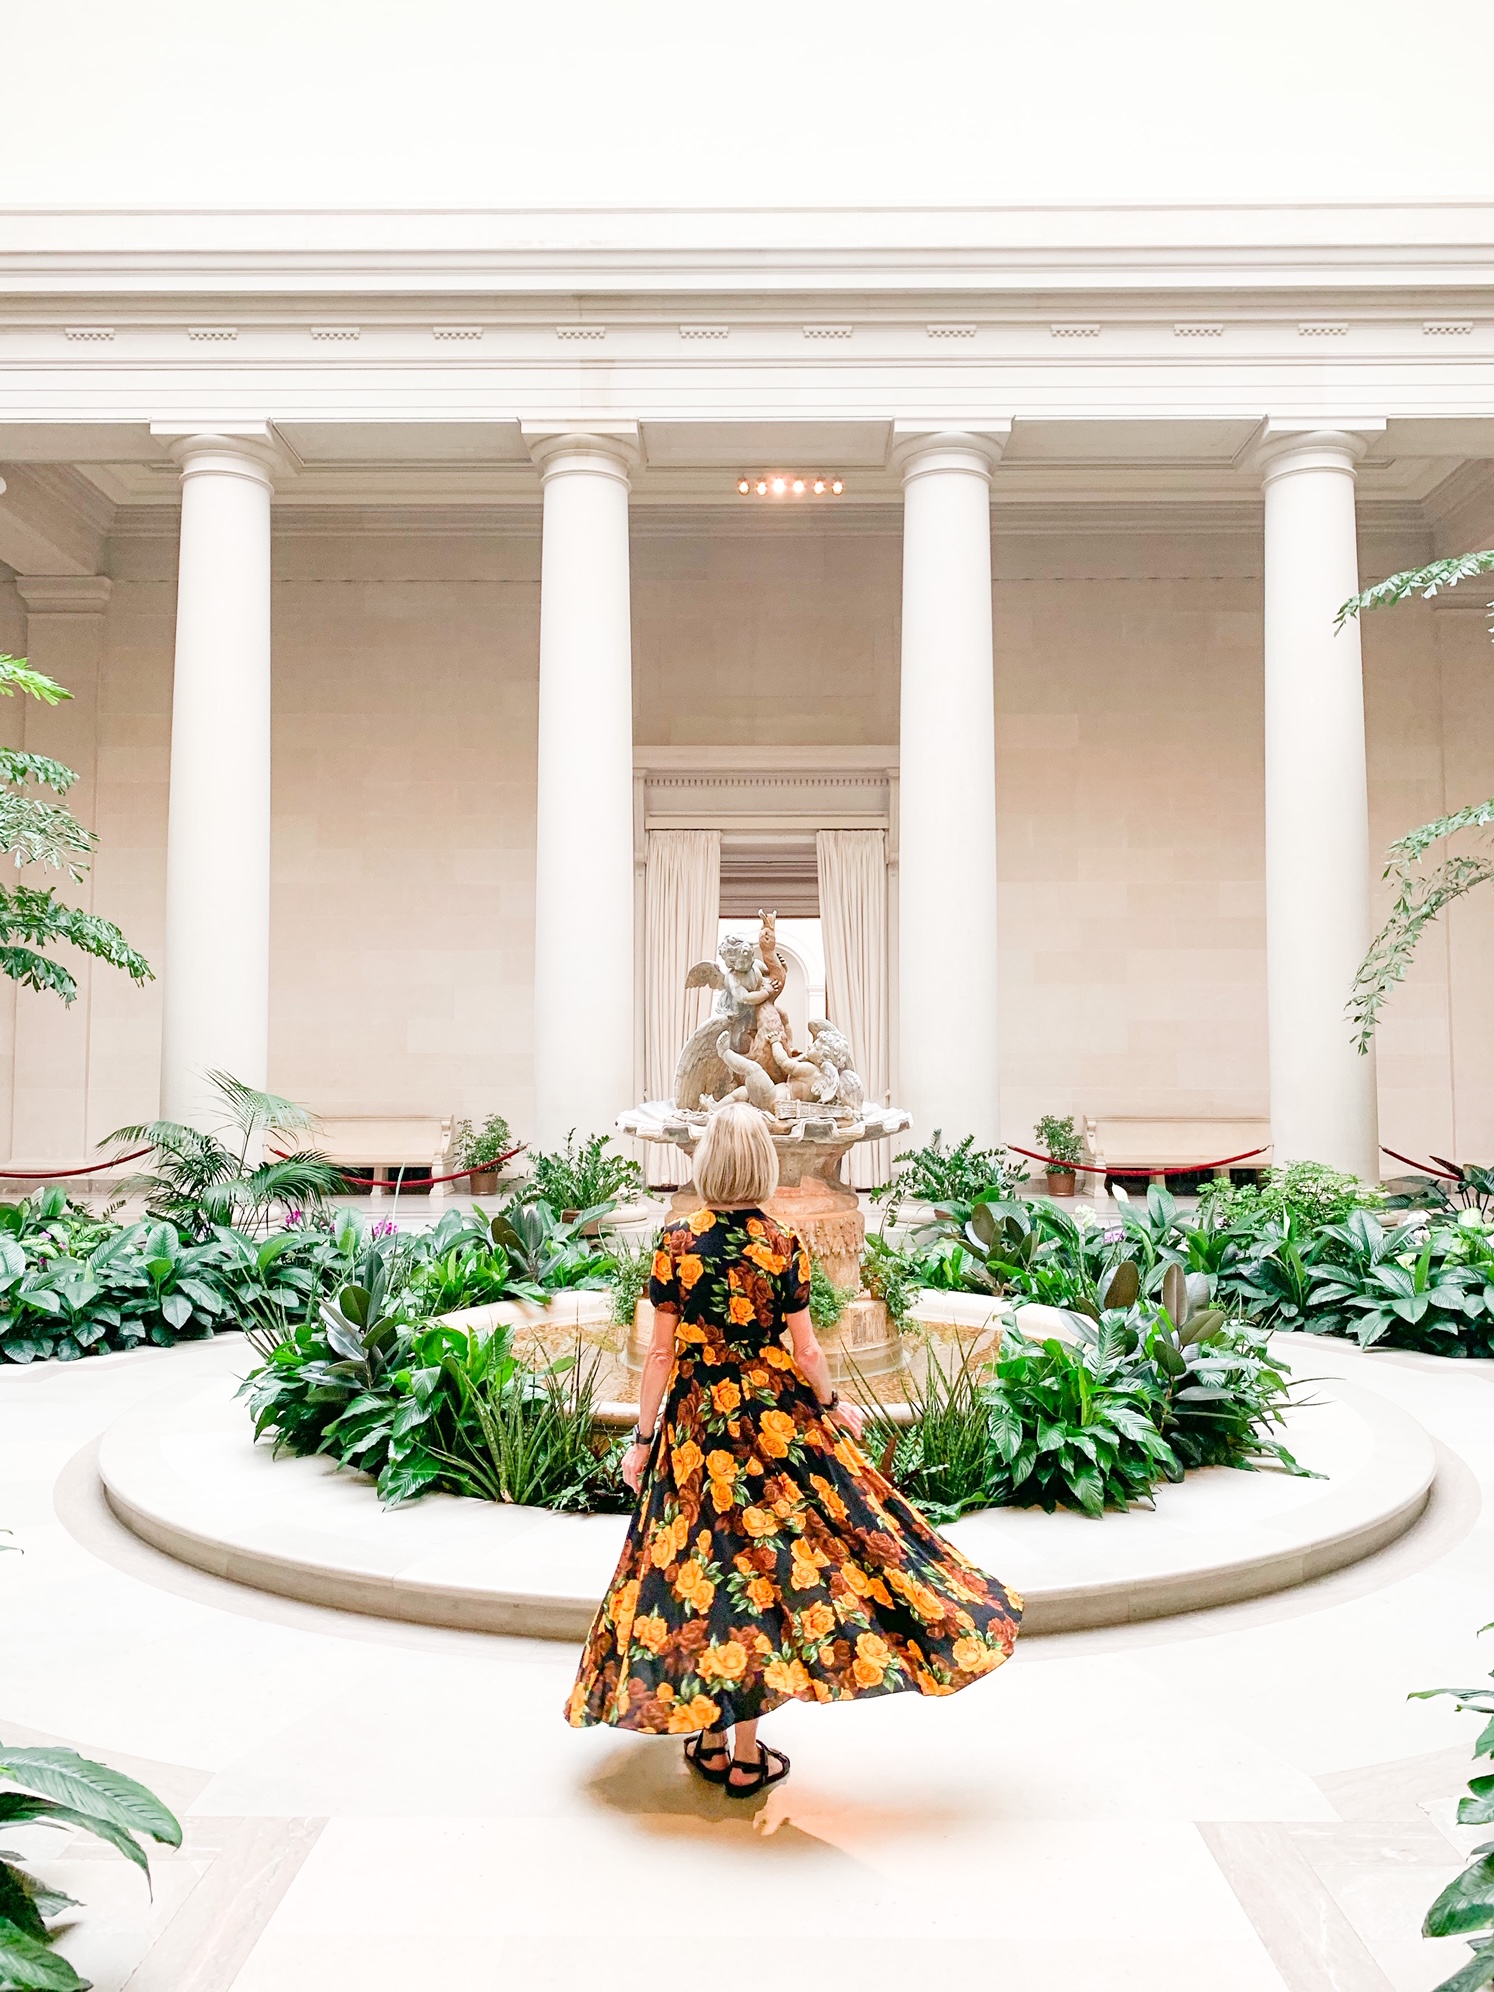 A woman in a dark floral dress looking away from the camera towards a fountain in the middle of a courtyard. The courtyard has lots of greenery and roman columns around a hallway that leads to other rooms. 